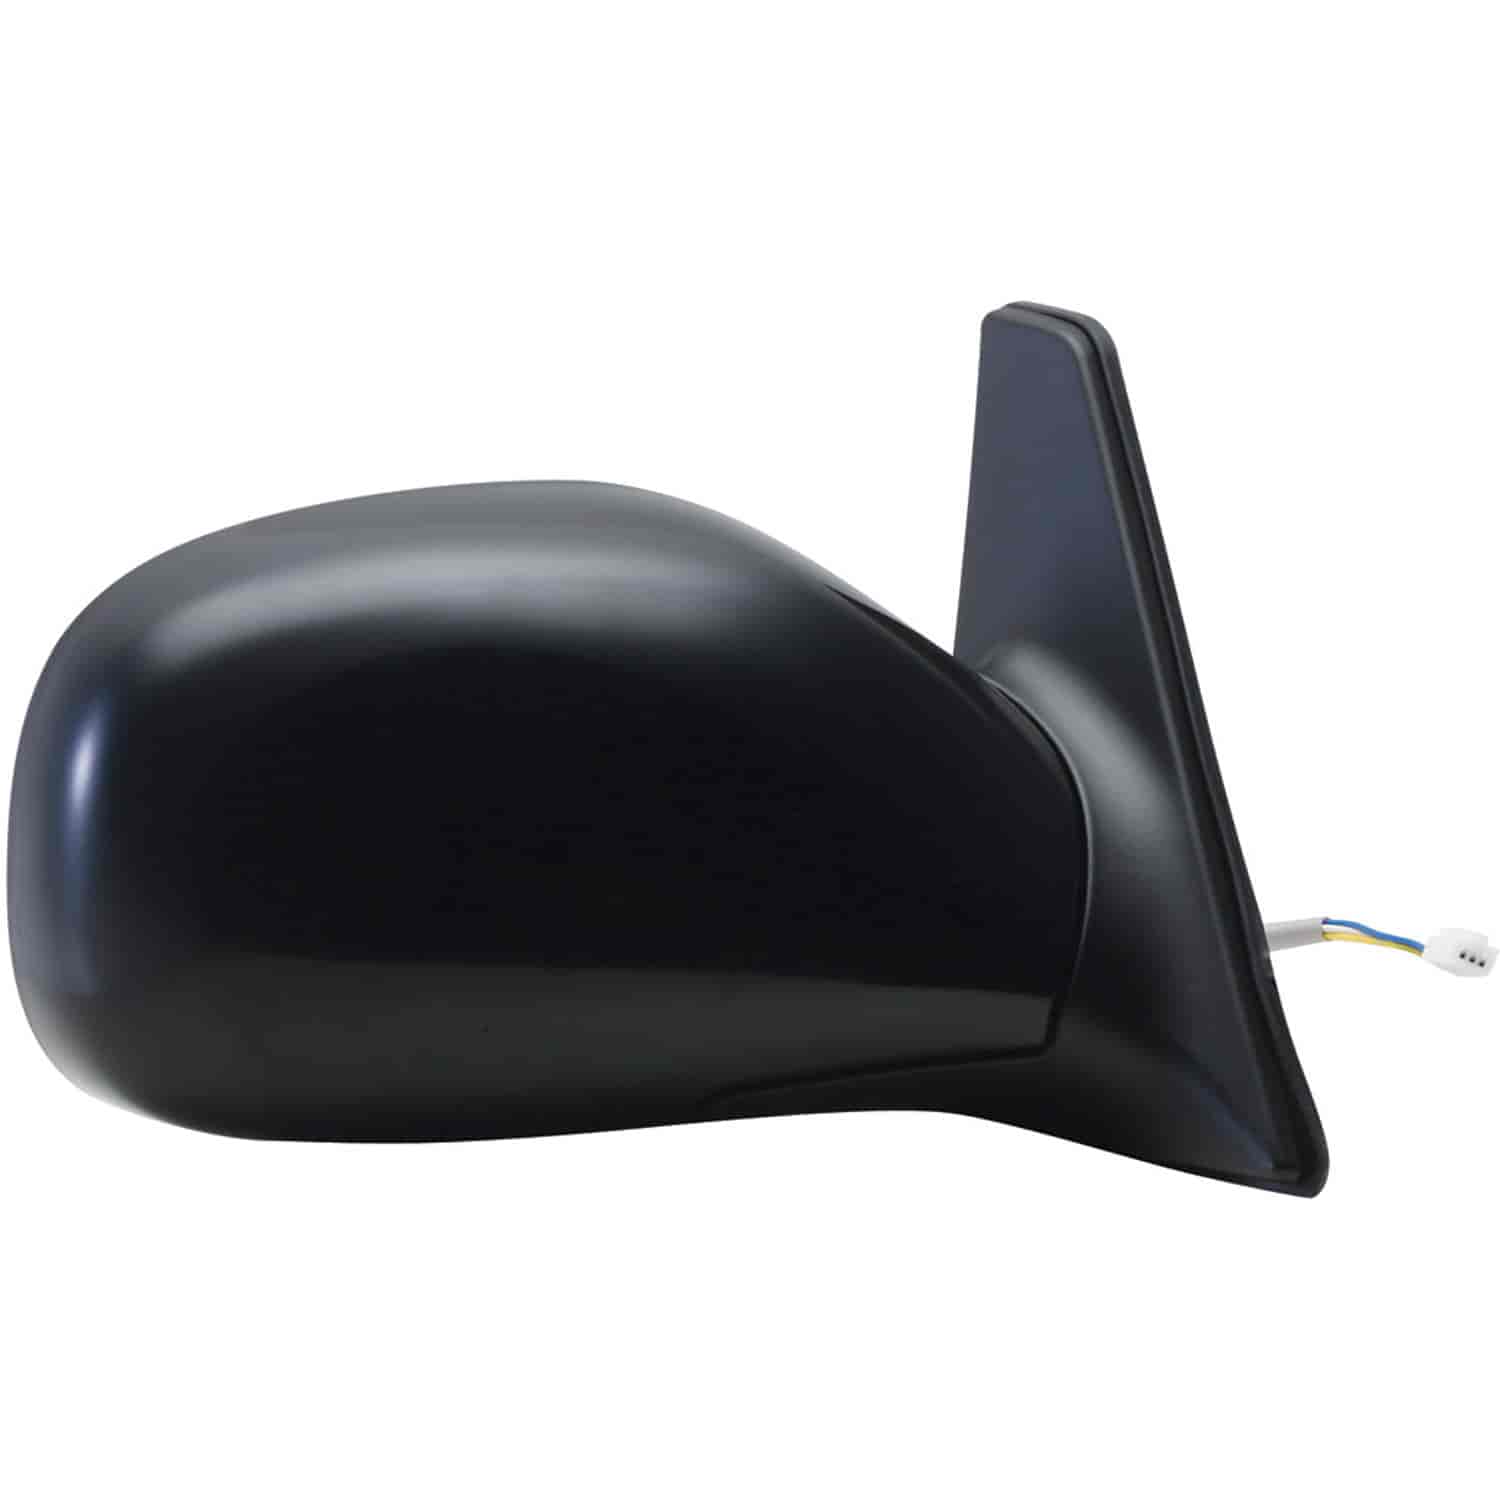 OEM Style Replacement mirror for 96-97 Toyota RAV4 4 door passenger side mirror tested to fit and fu